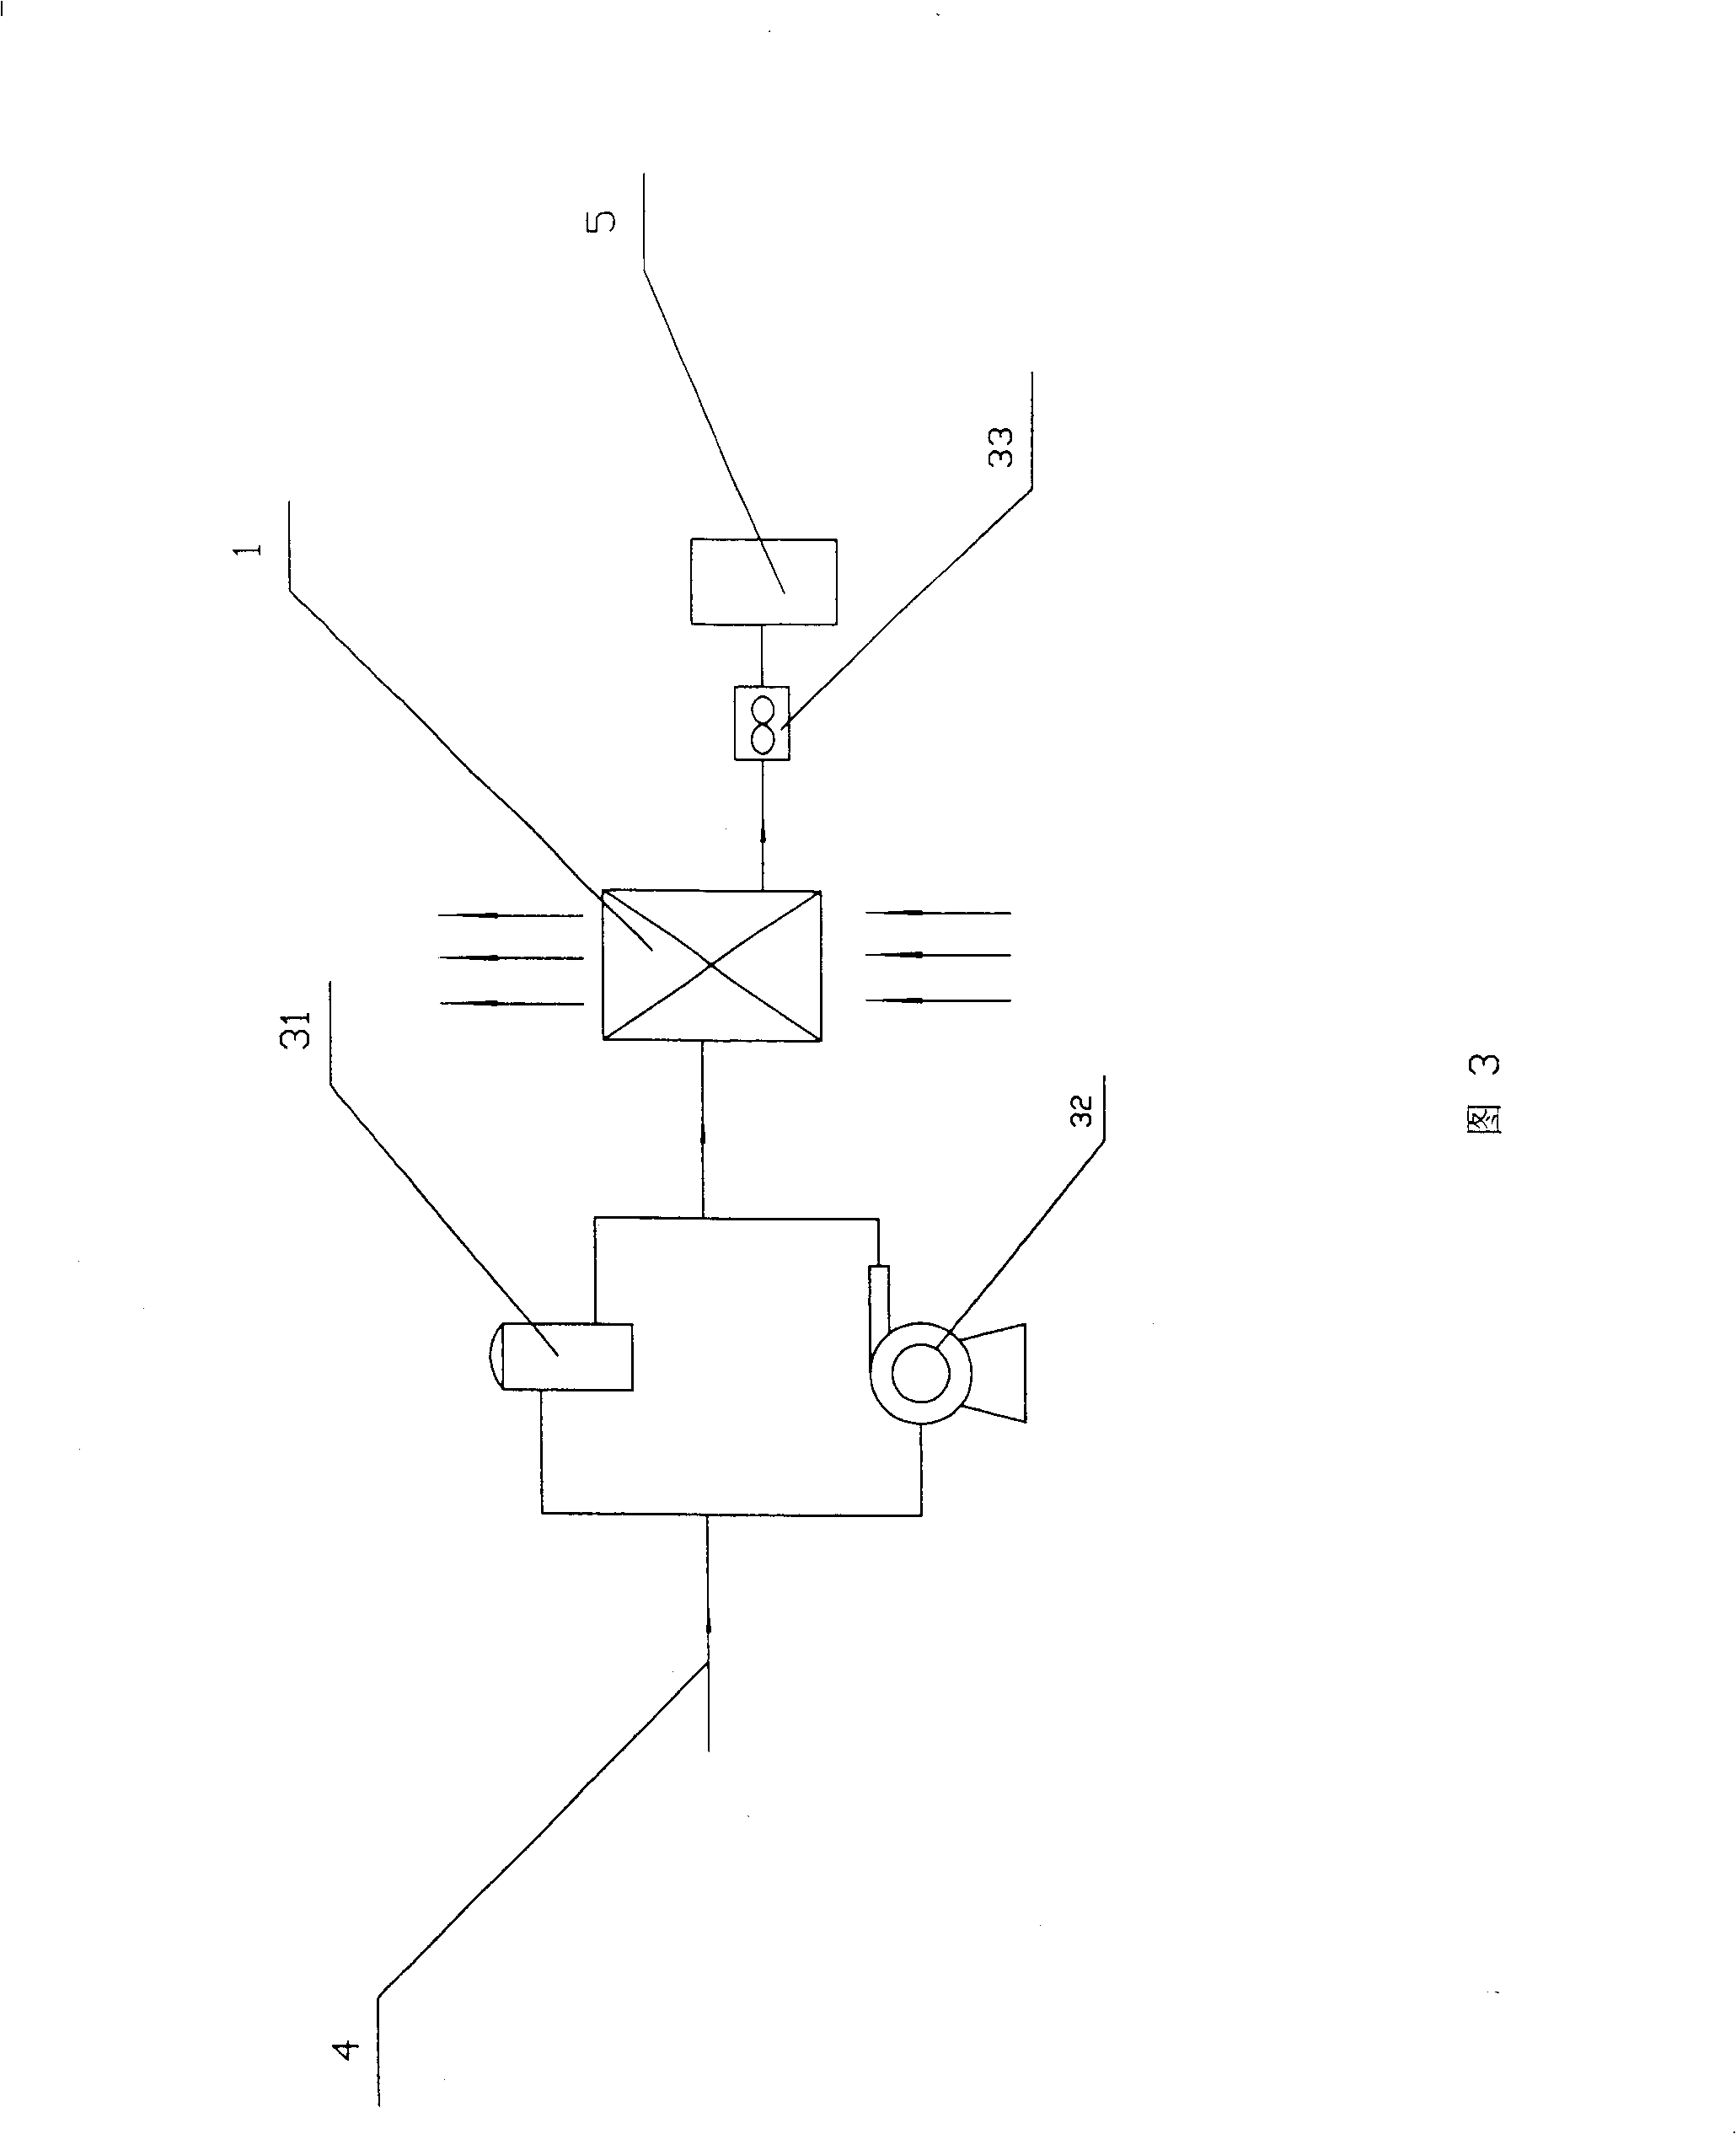 Bottoms combustion air preheater system and method of ethylene cracking furnace